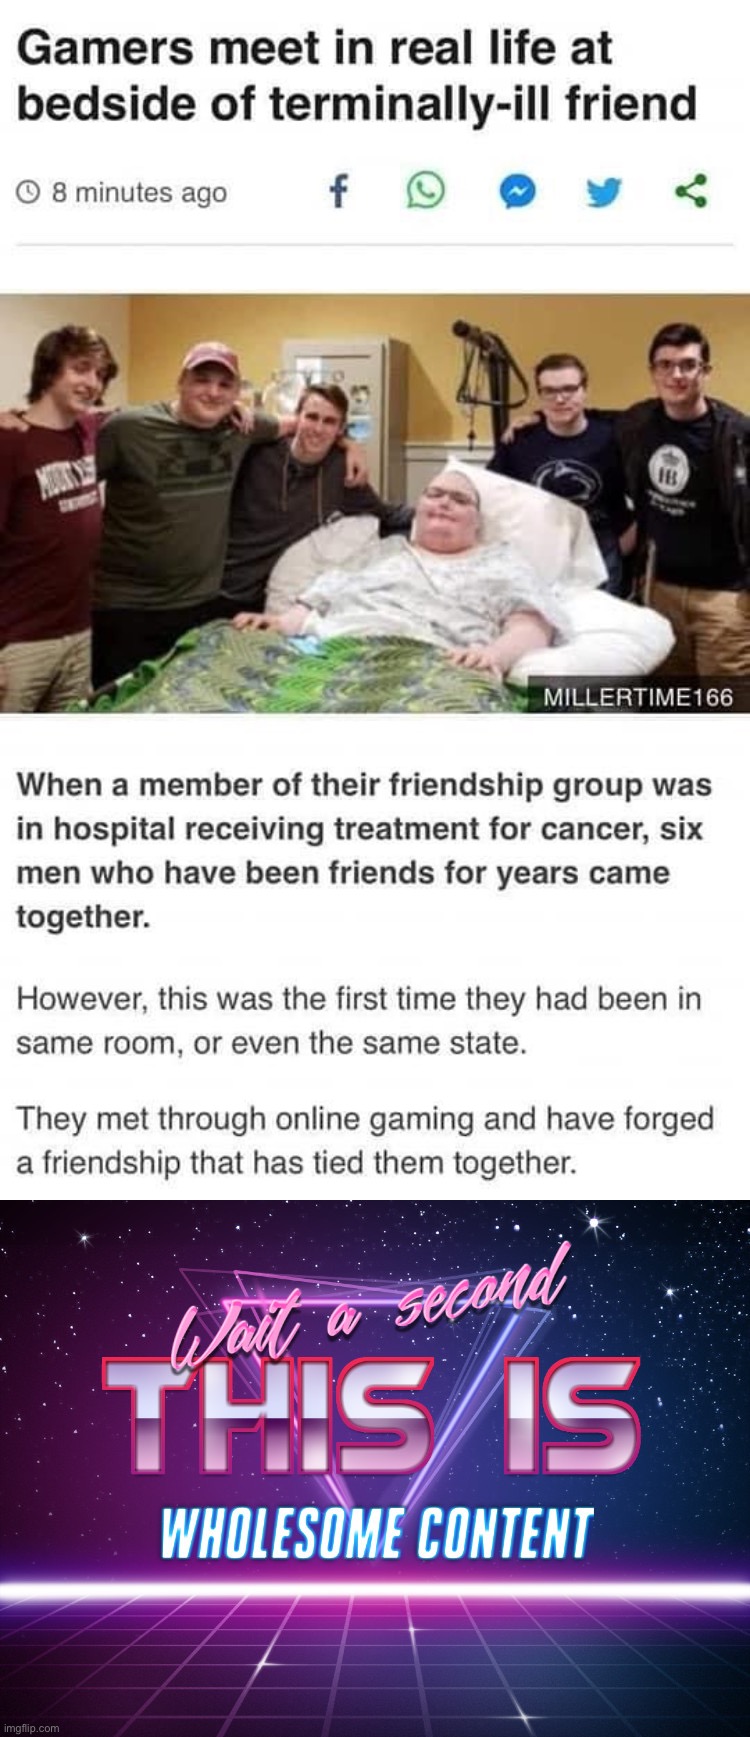 Wholesome 100 | image tagged in wholesome gamers,wait a second this is wholesome content,wholesome,content,wholesome 100,gamers rise up | made w/ Imgflip meme maker